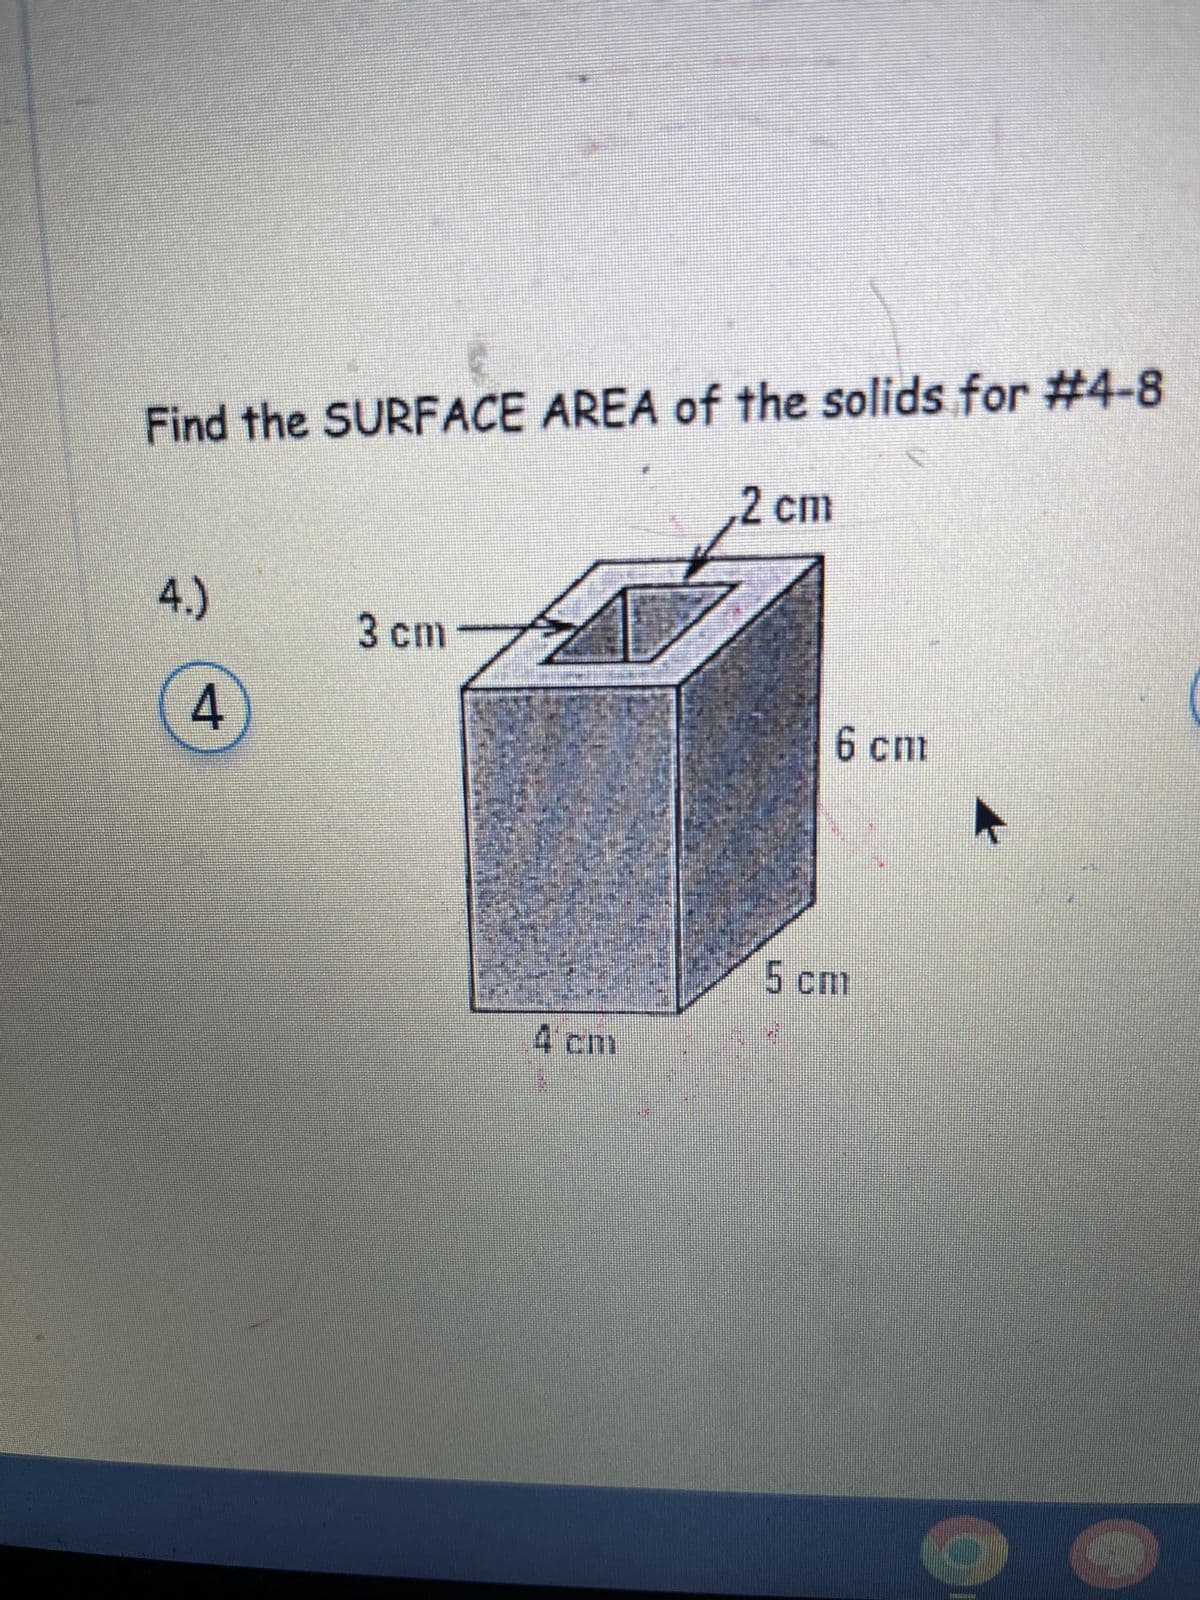 Find the SURFACE AREA of the solids for #4-8
2 cm
4.)
4)
3 cm
4 cm
6 cm
5 cm
►